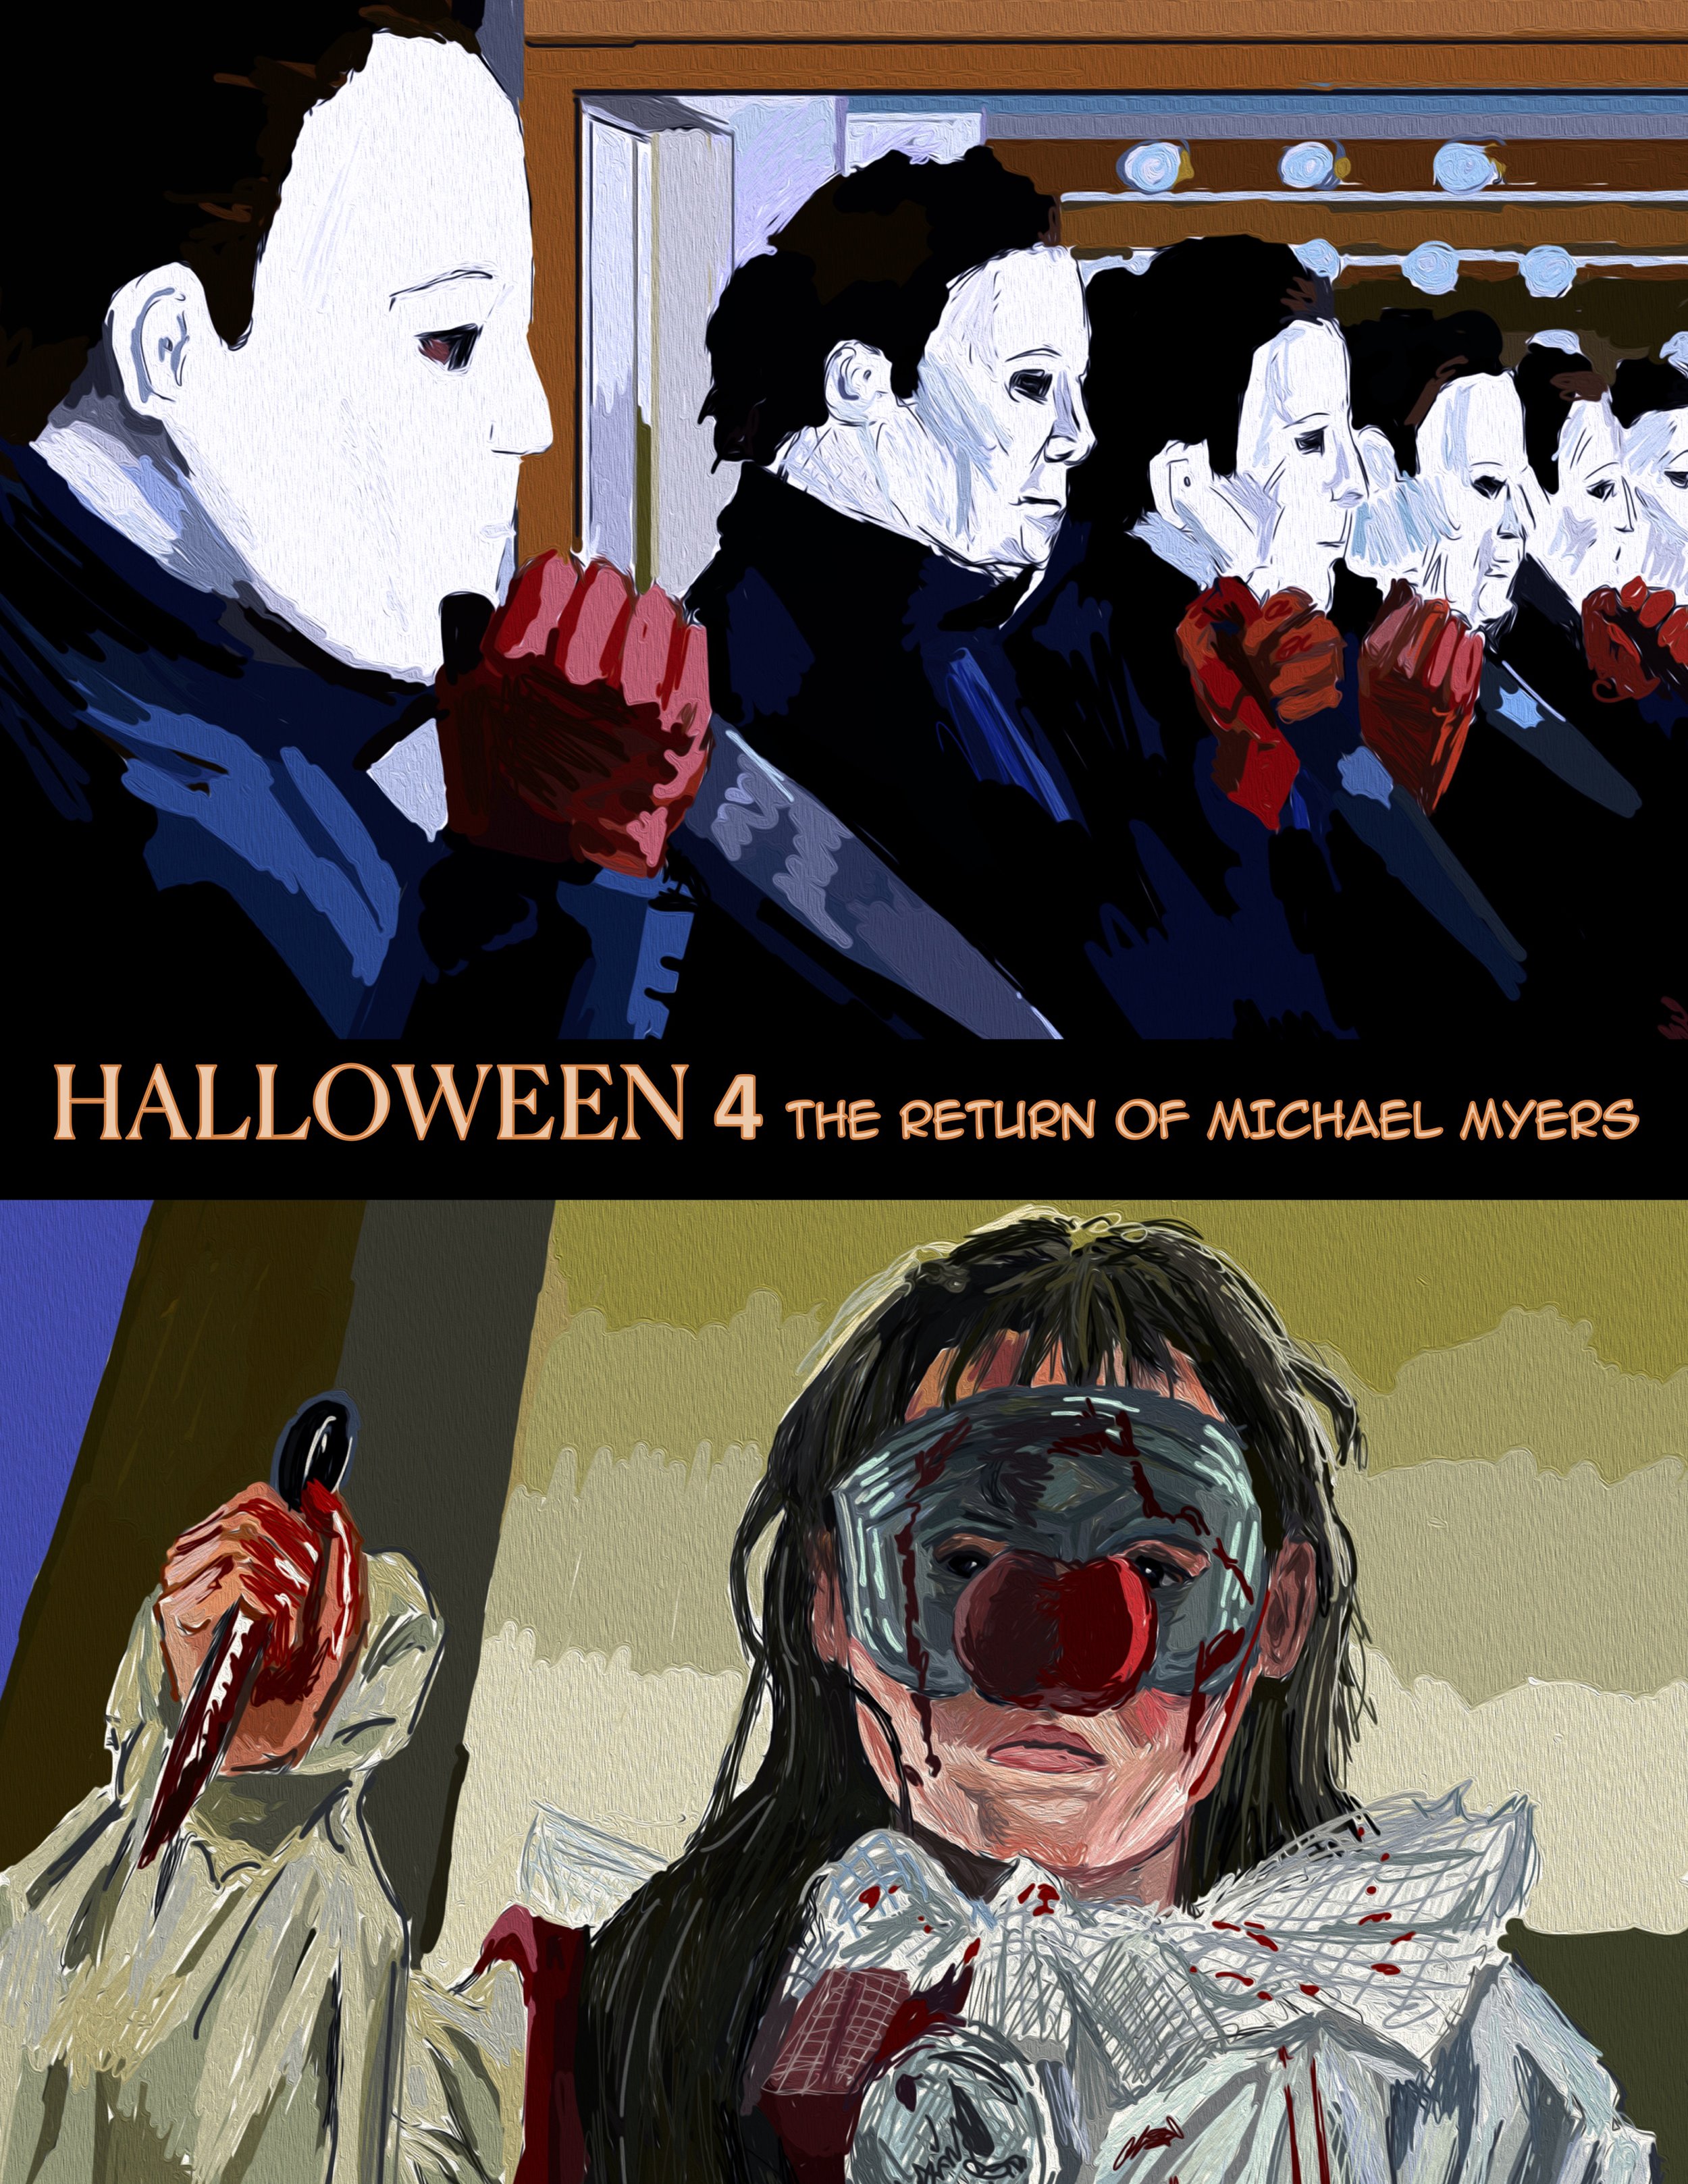 Halloween 4: The Return of Michael Myers (1988) and 